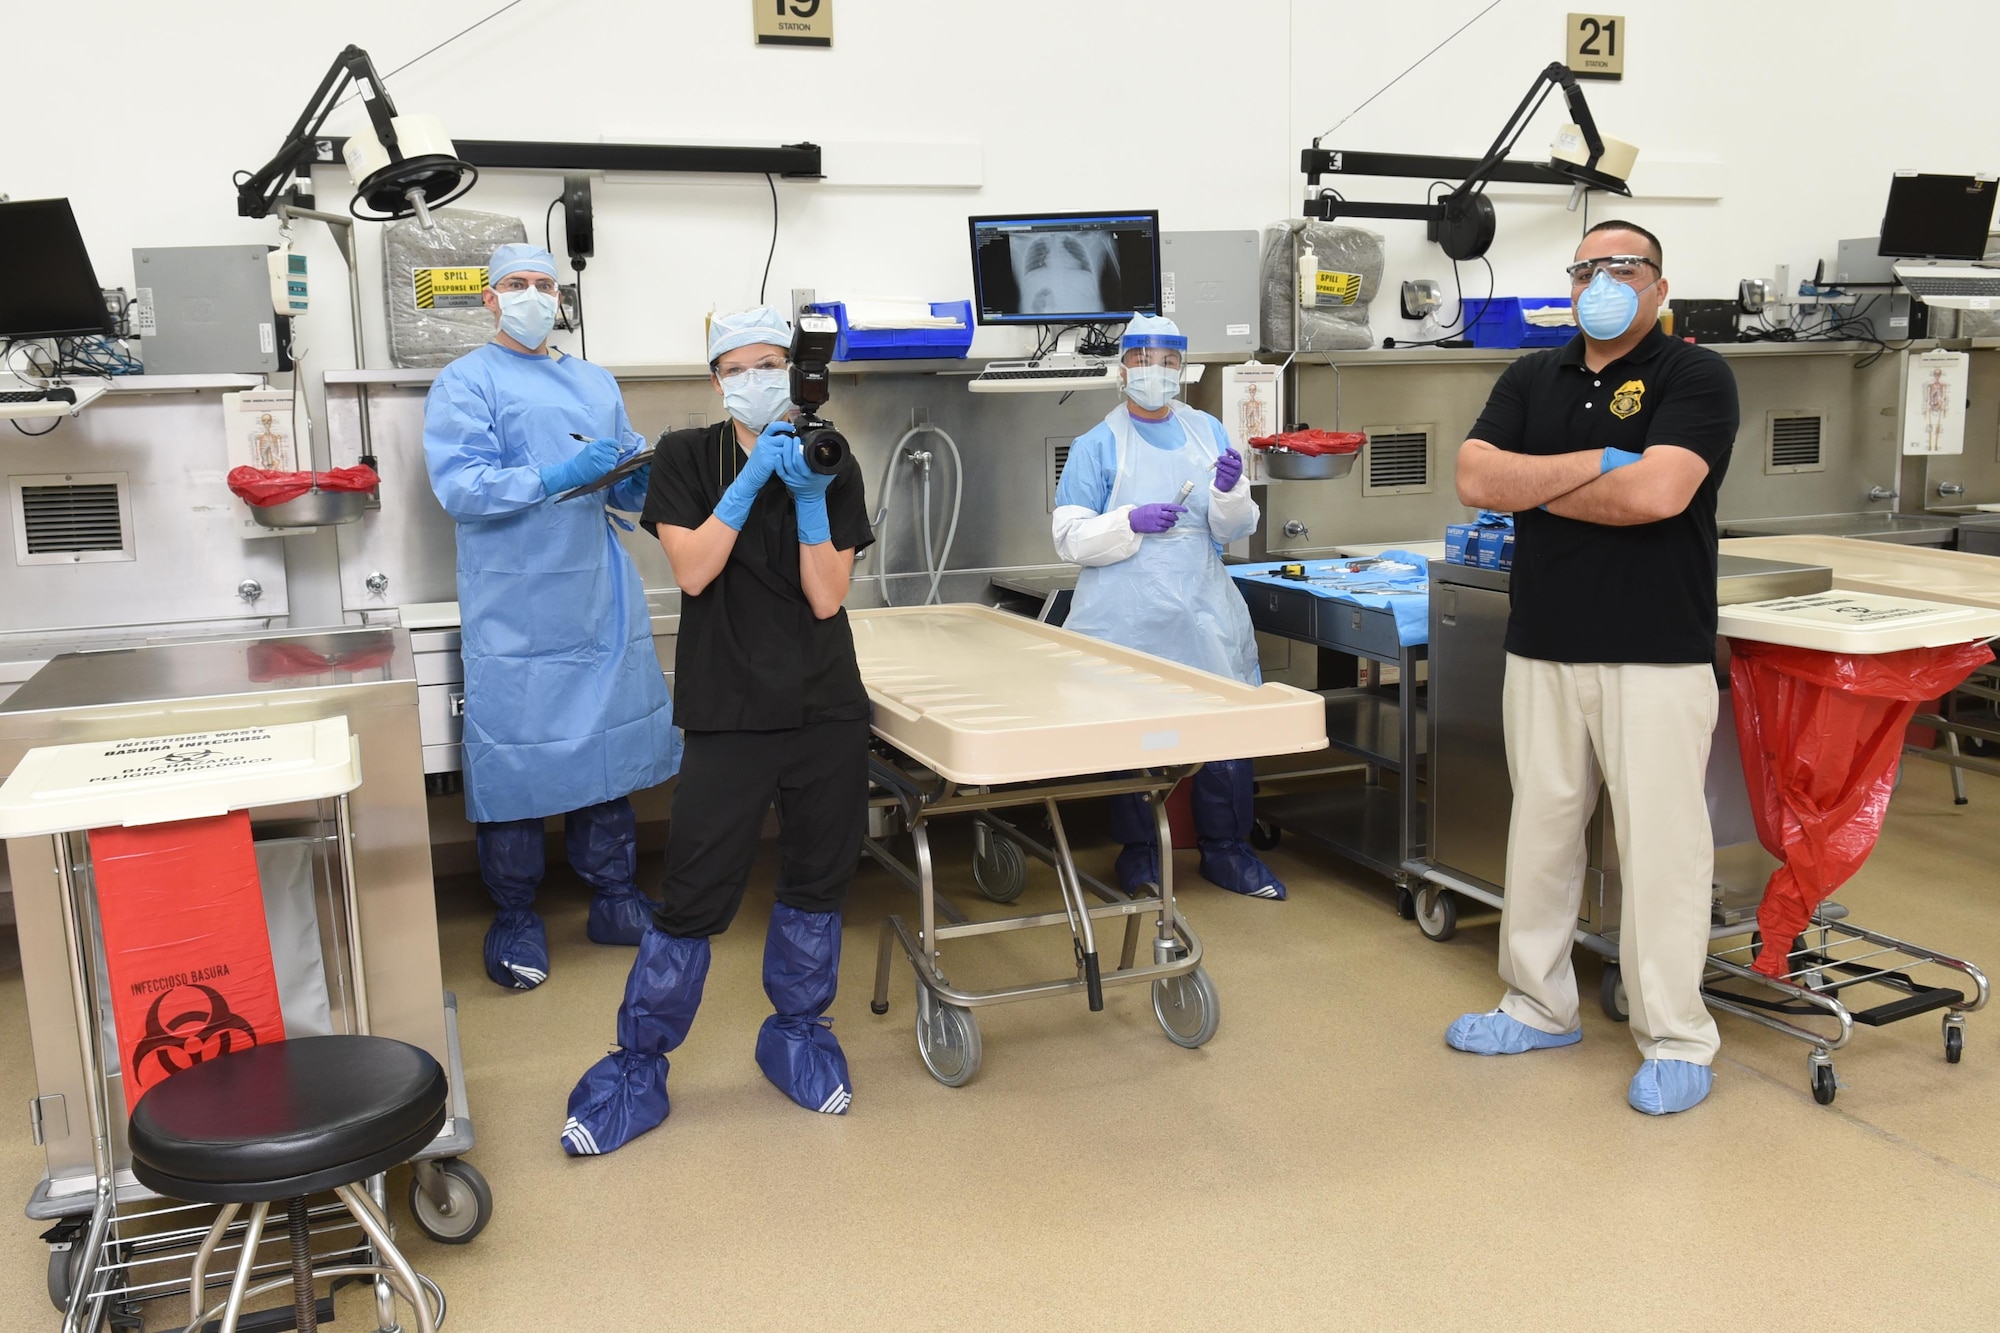 Office of the Armed Forces Medical Examiner personnel pose for a photo in the autopsy suite Sept. 10, 2015, at the Armed Forces Medical Examiner System on Dover Air Force Base, Del. OAFME personnel include board certified forensic pathologists, forensic anthropologists, medical-legal death investigators, photographers and mortuary affairs specialists. (U.S. Navy photo/Mass Communication Specialist 2nd Class Samantha Thorpe)